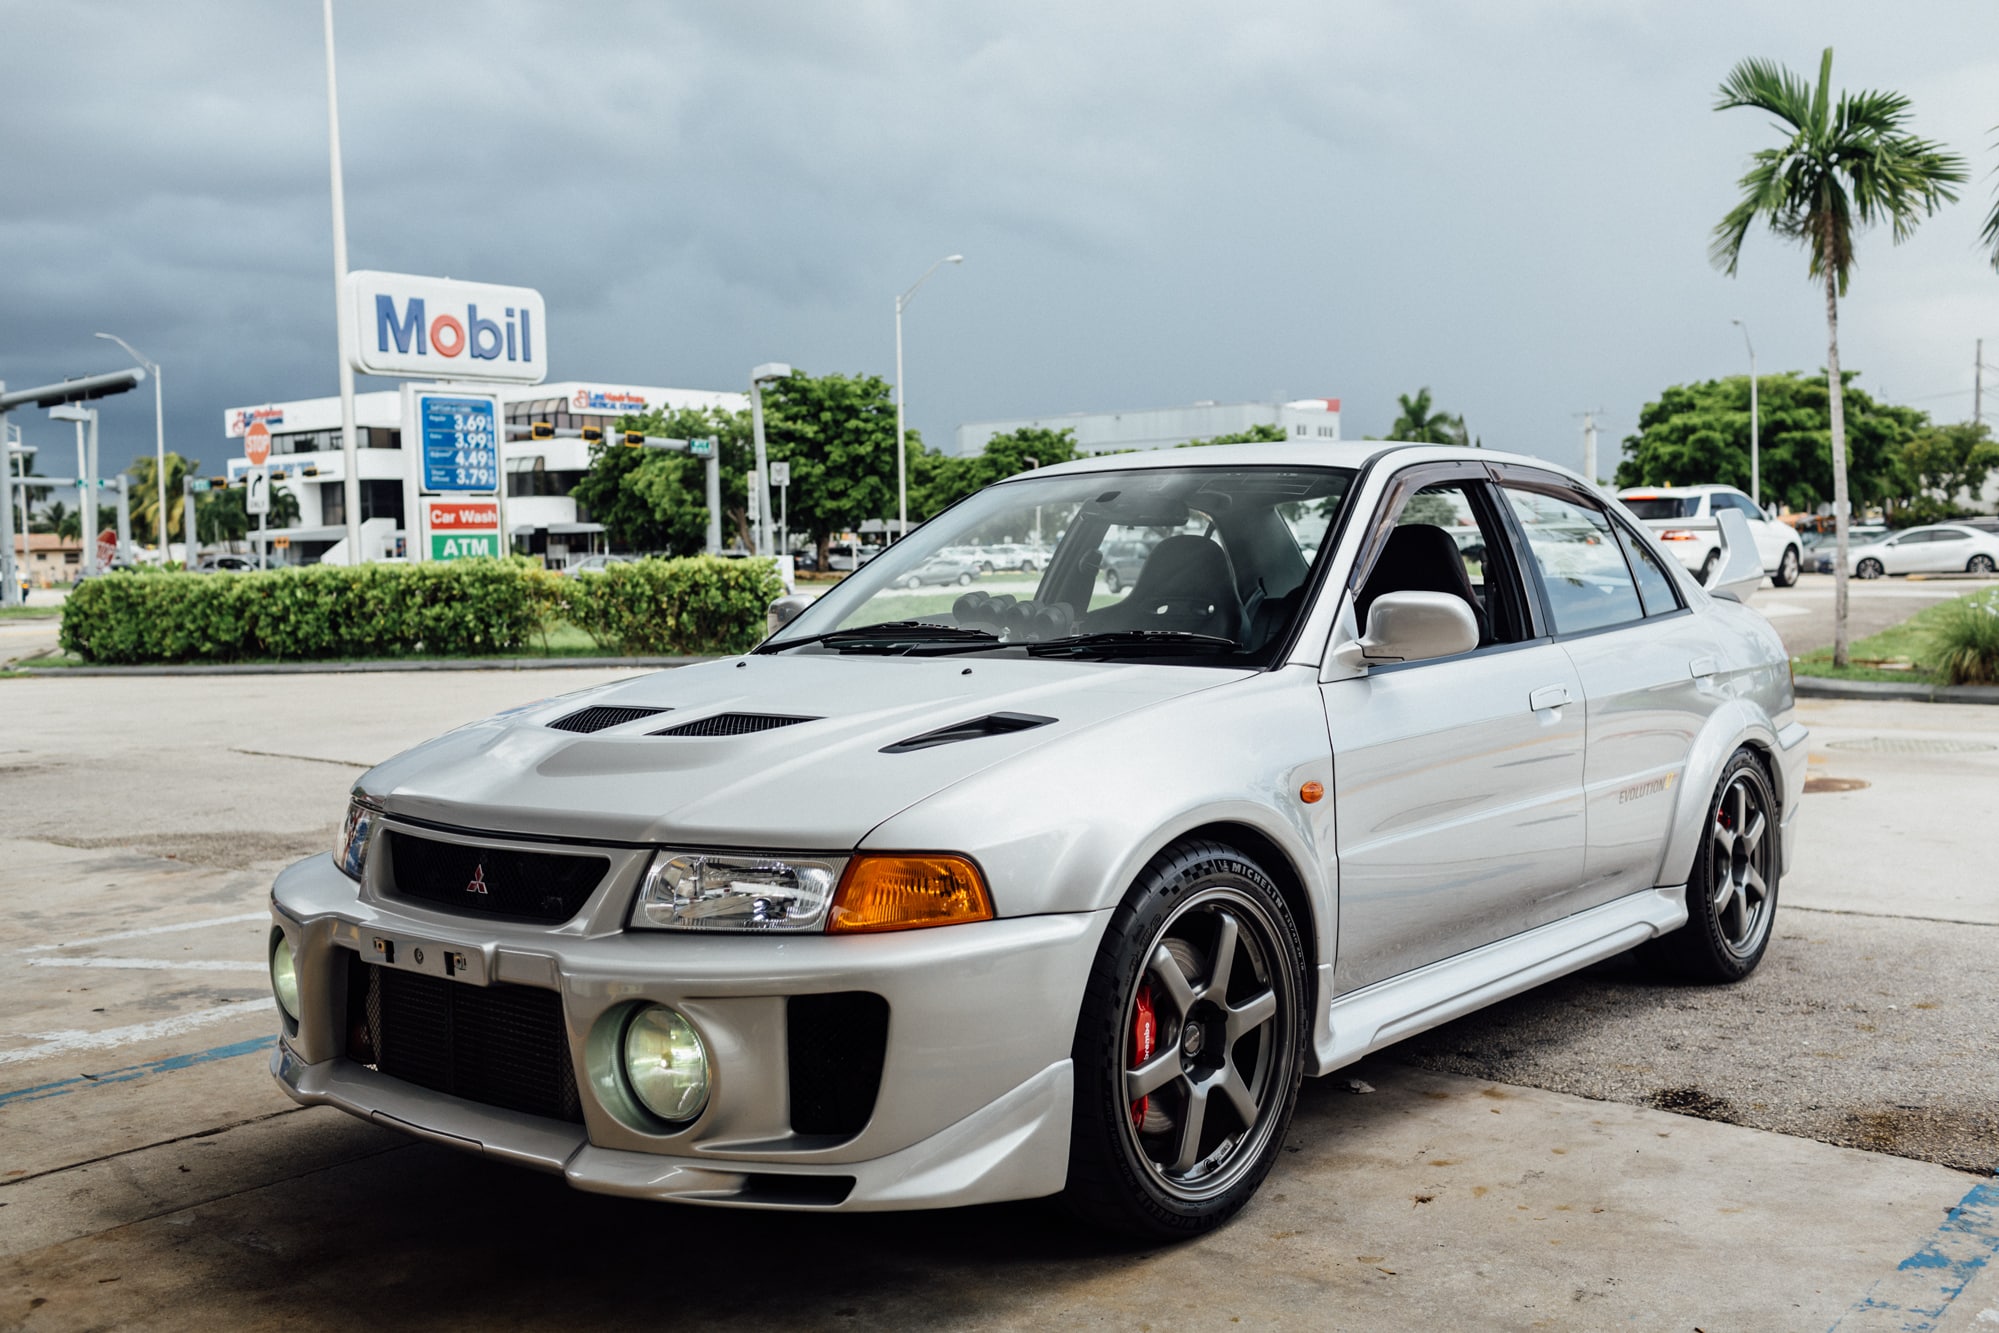 1998 Mitsubishi Lancer Evolution V GSR (CP9A)| 1 of 1,903 | Mint Condition | Extremely Dialed-in Suspension Setup | Blitz ZZR Coilovers | Cusco Bits | Michelin Sport Cup 2 | Boost Up | Ralliart Exhaust | Gruppe M Intake | OEM++